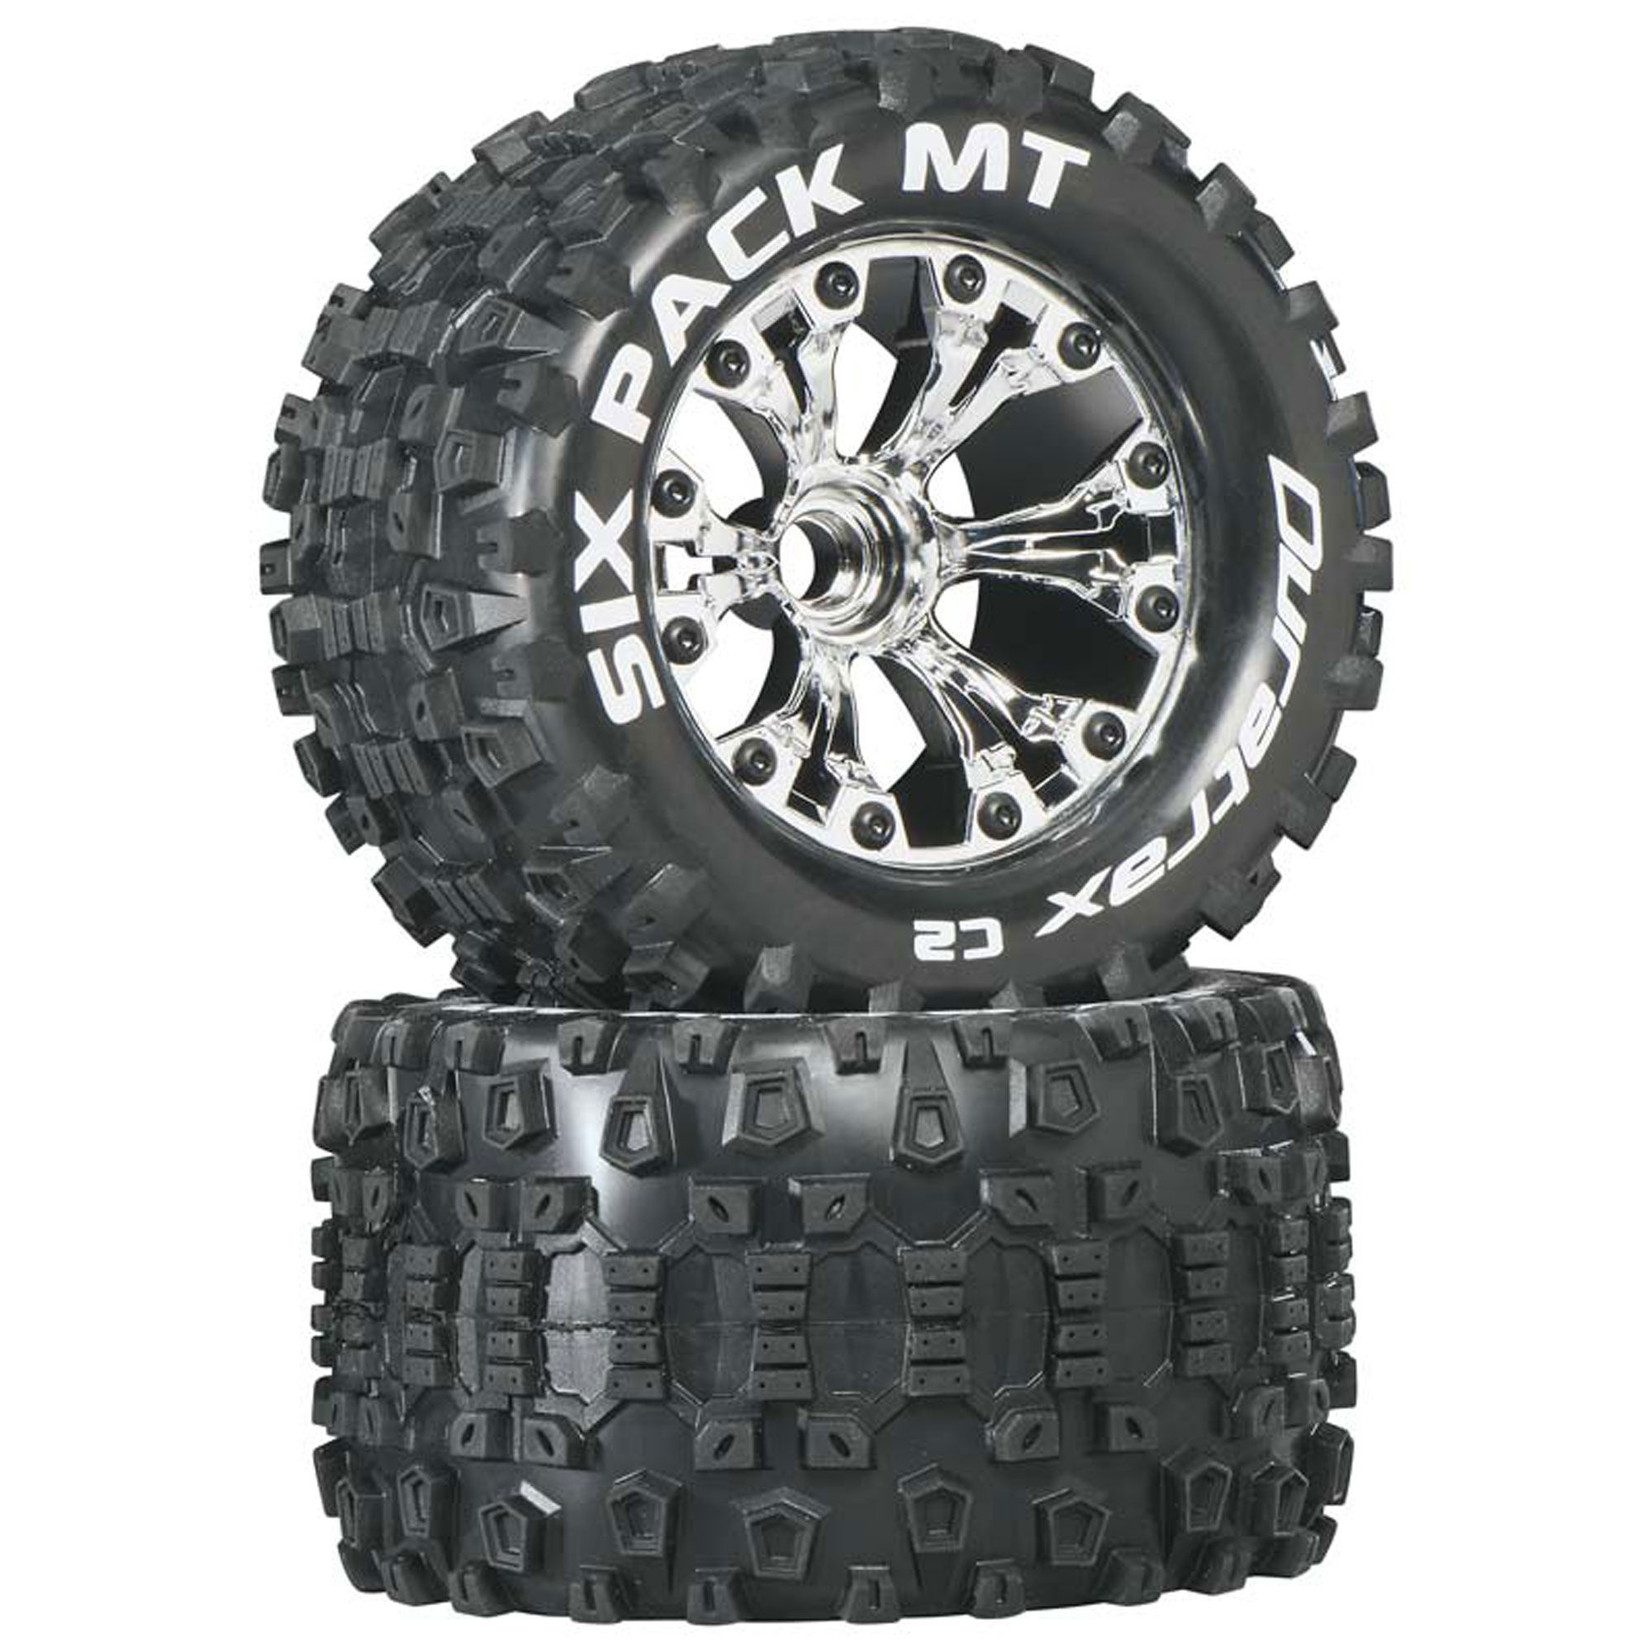 Duratrax Six-Pack MT 2.8" 2WD Mounted Front C2 Tires, Chrome (2)